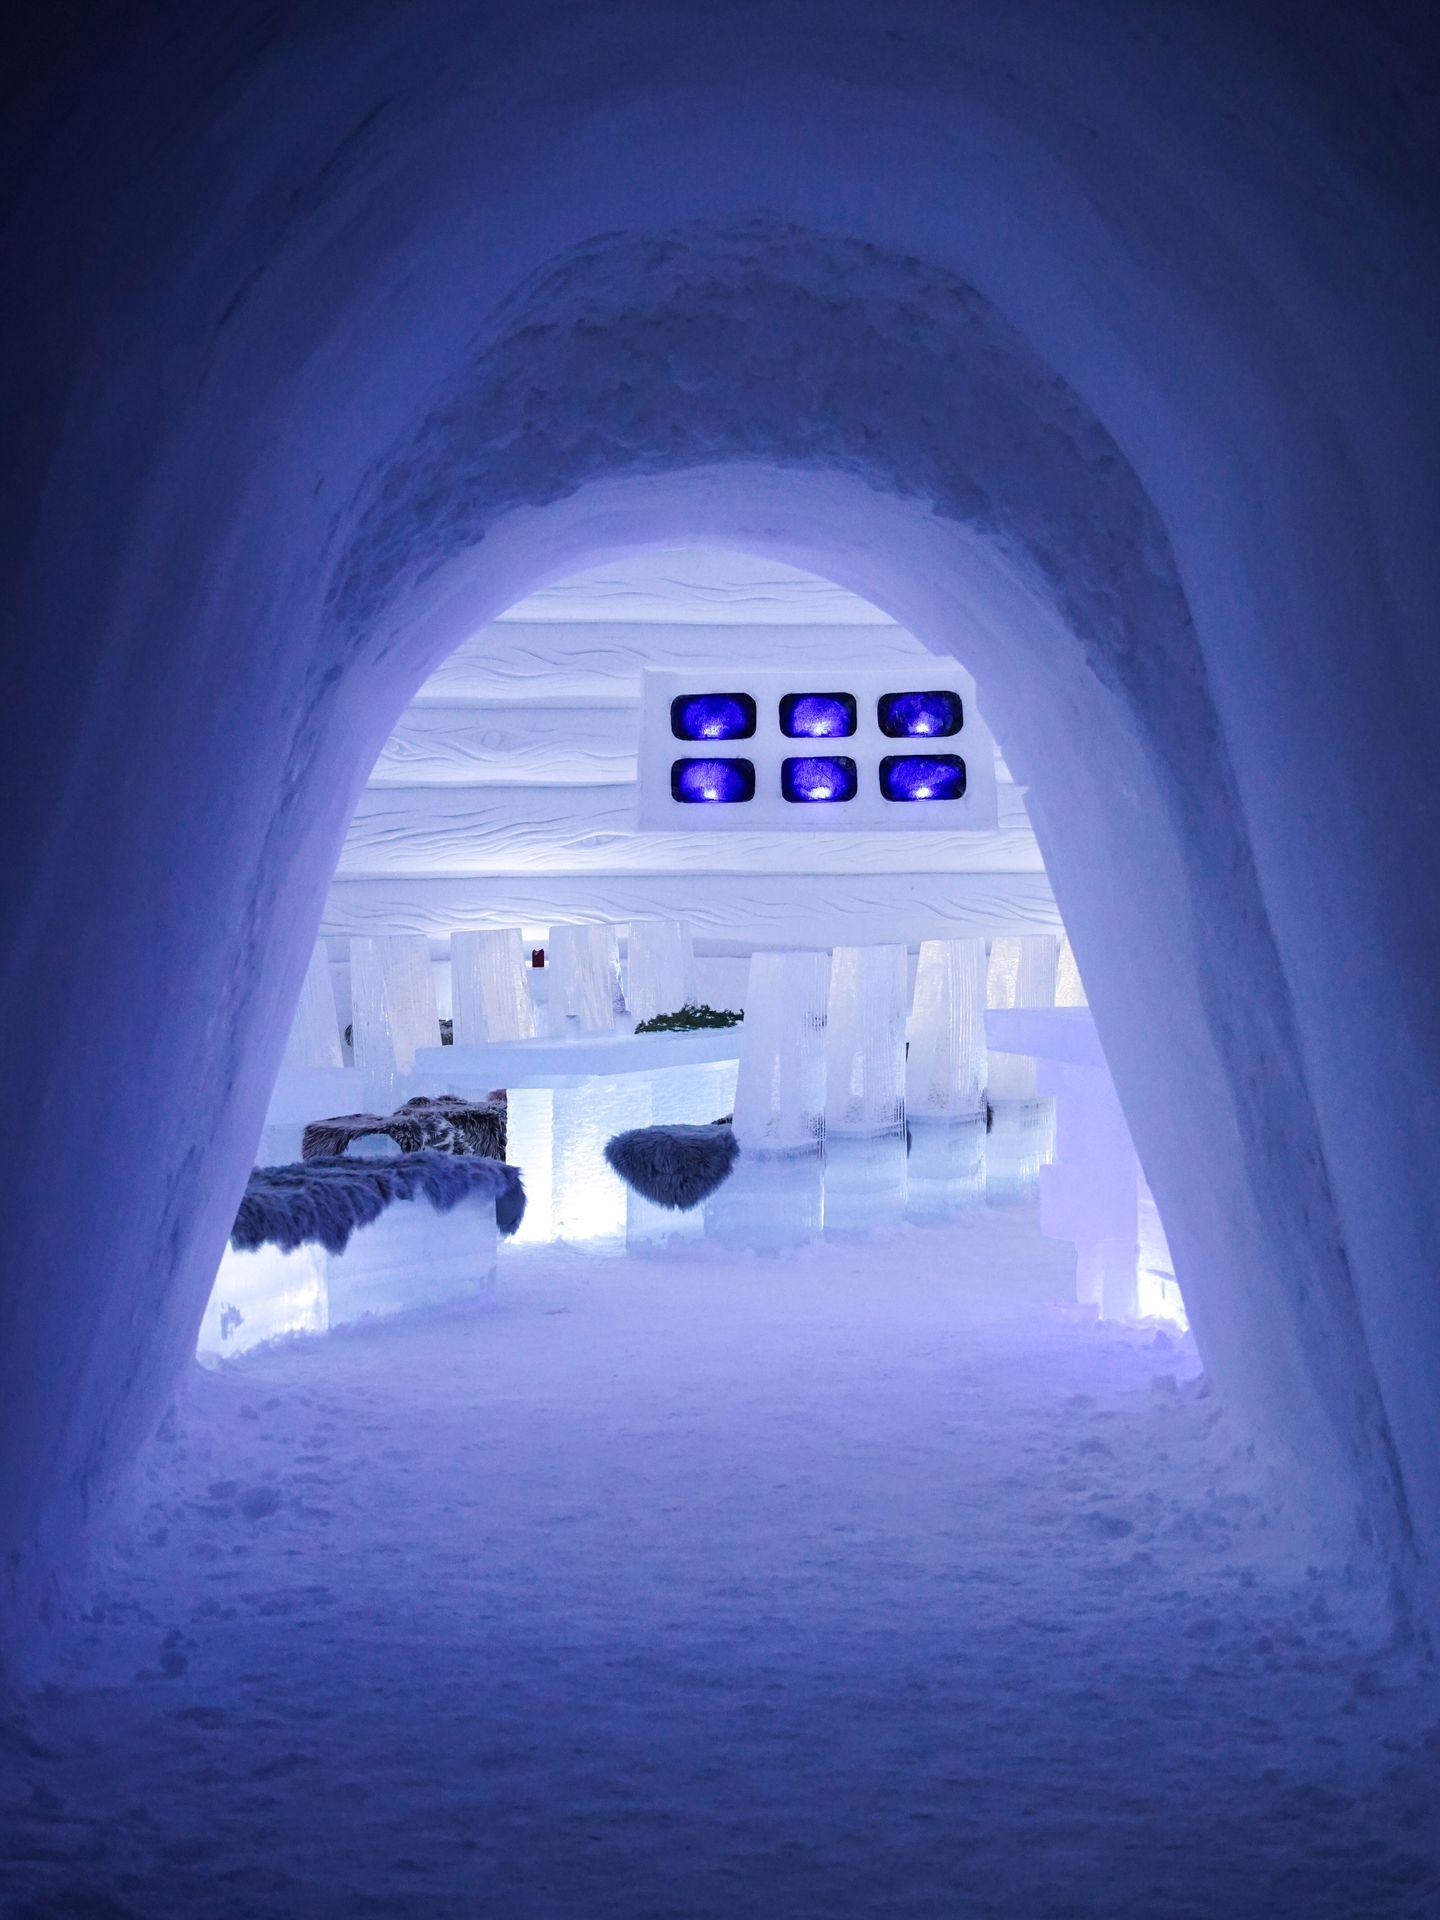 Looking through a snowy arch into a dining area made entirely of ice